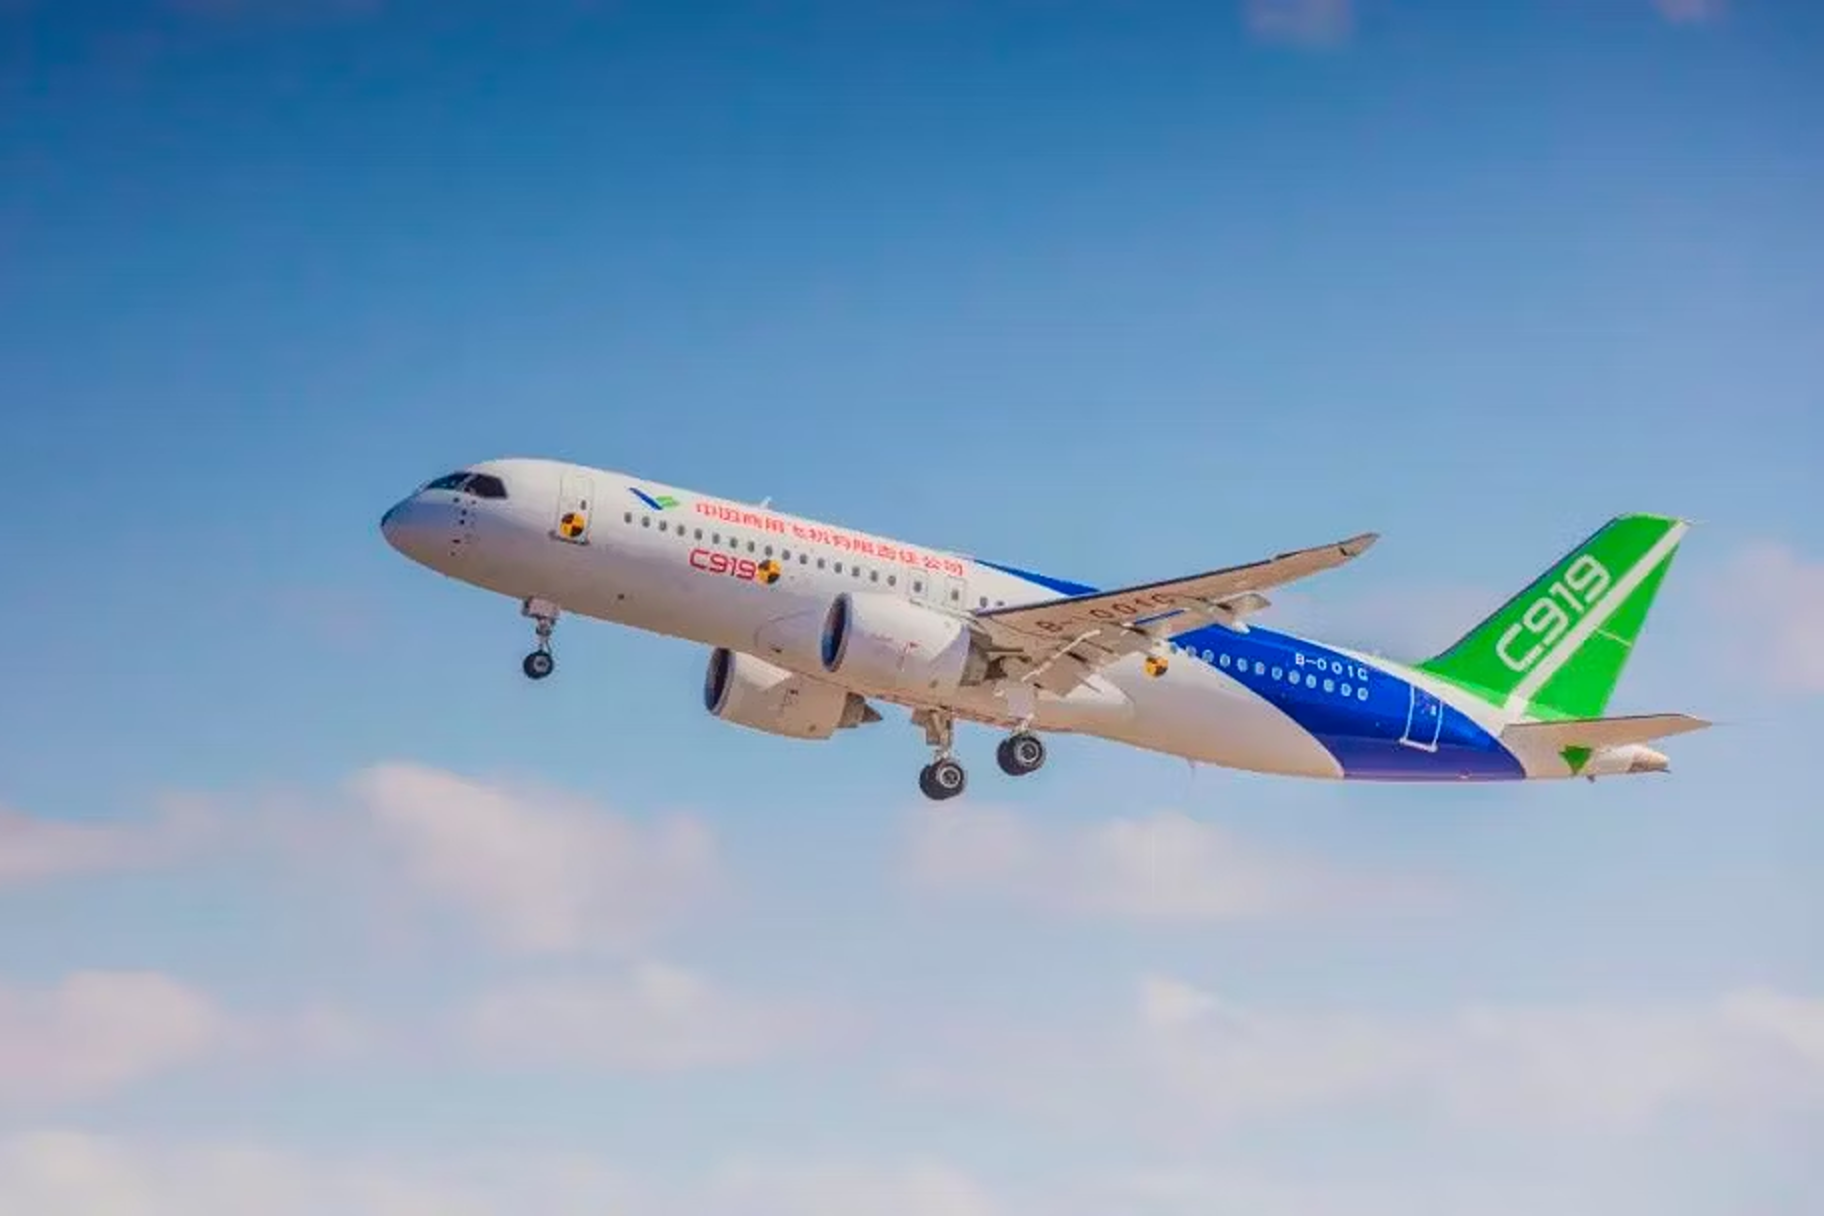 comac c919 taking off into a blue sky